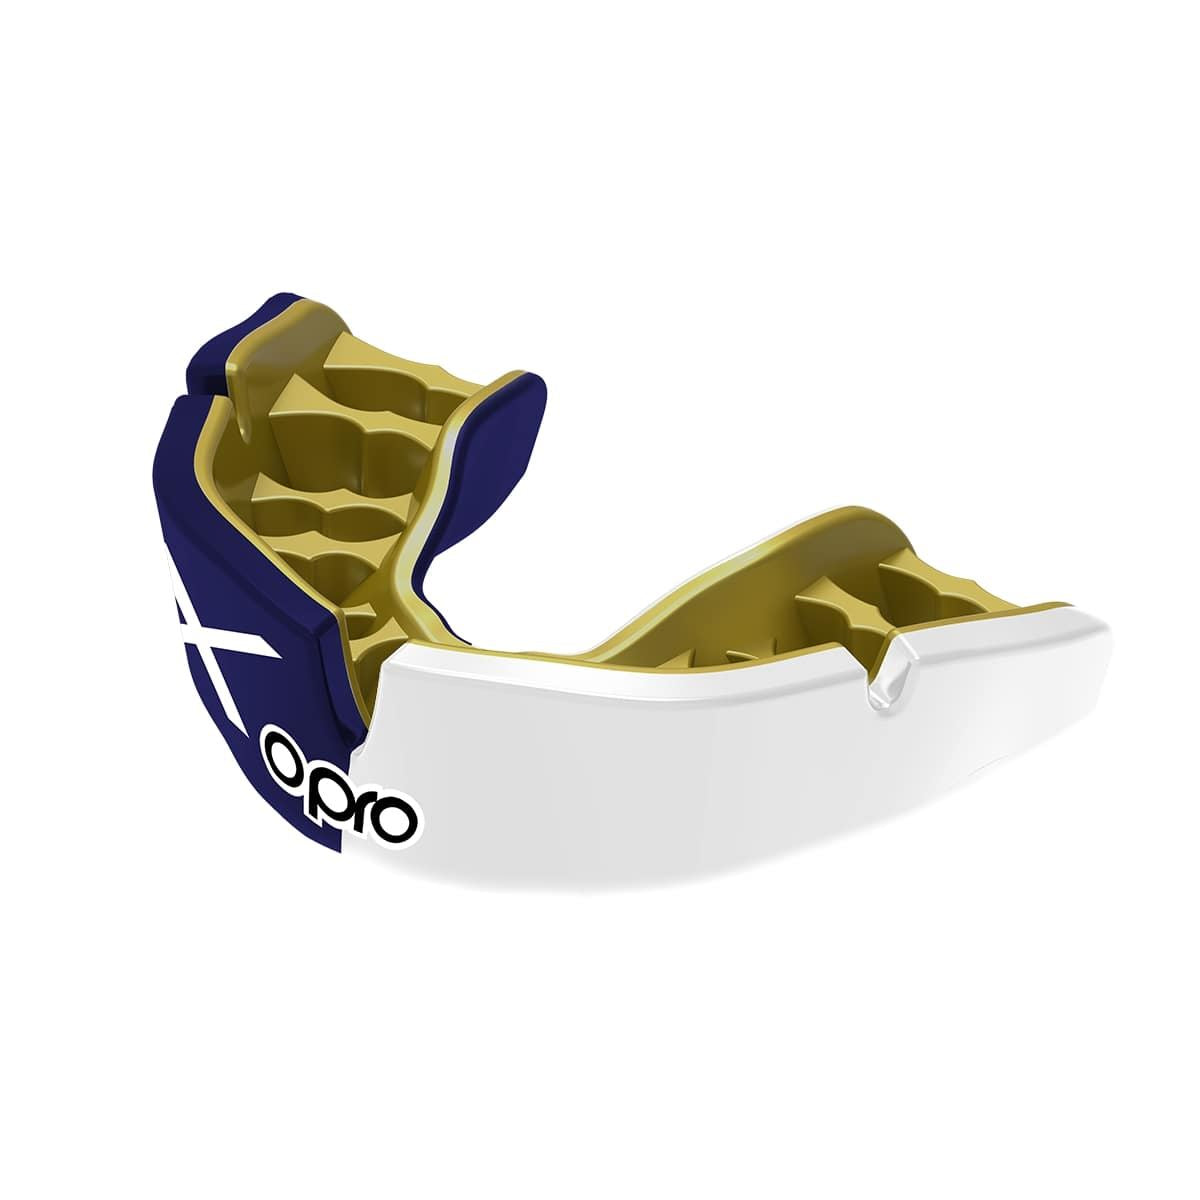 Men's Rugby Protective Mouthguard Opro Instant Custom Fit Countries 2022 Scotland